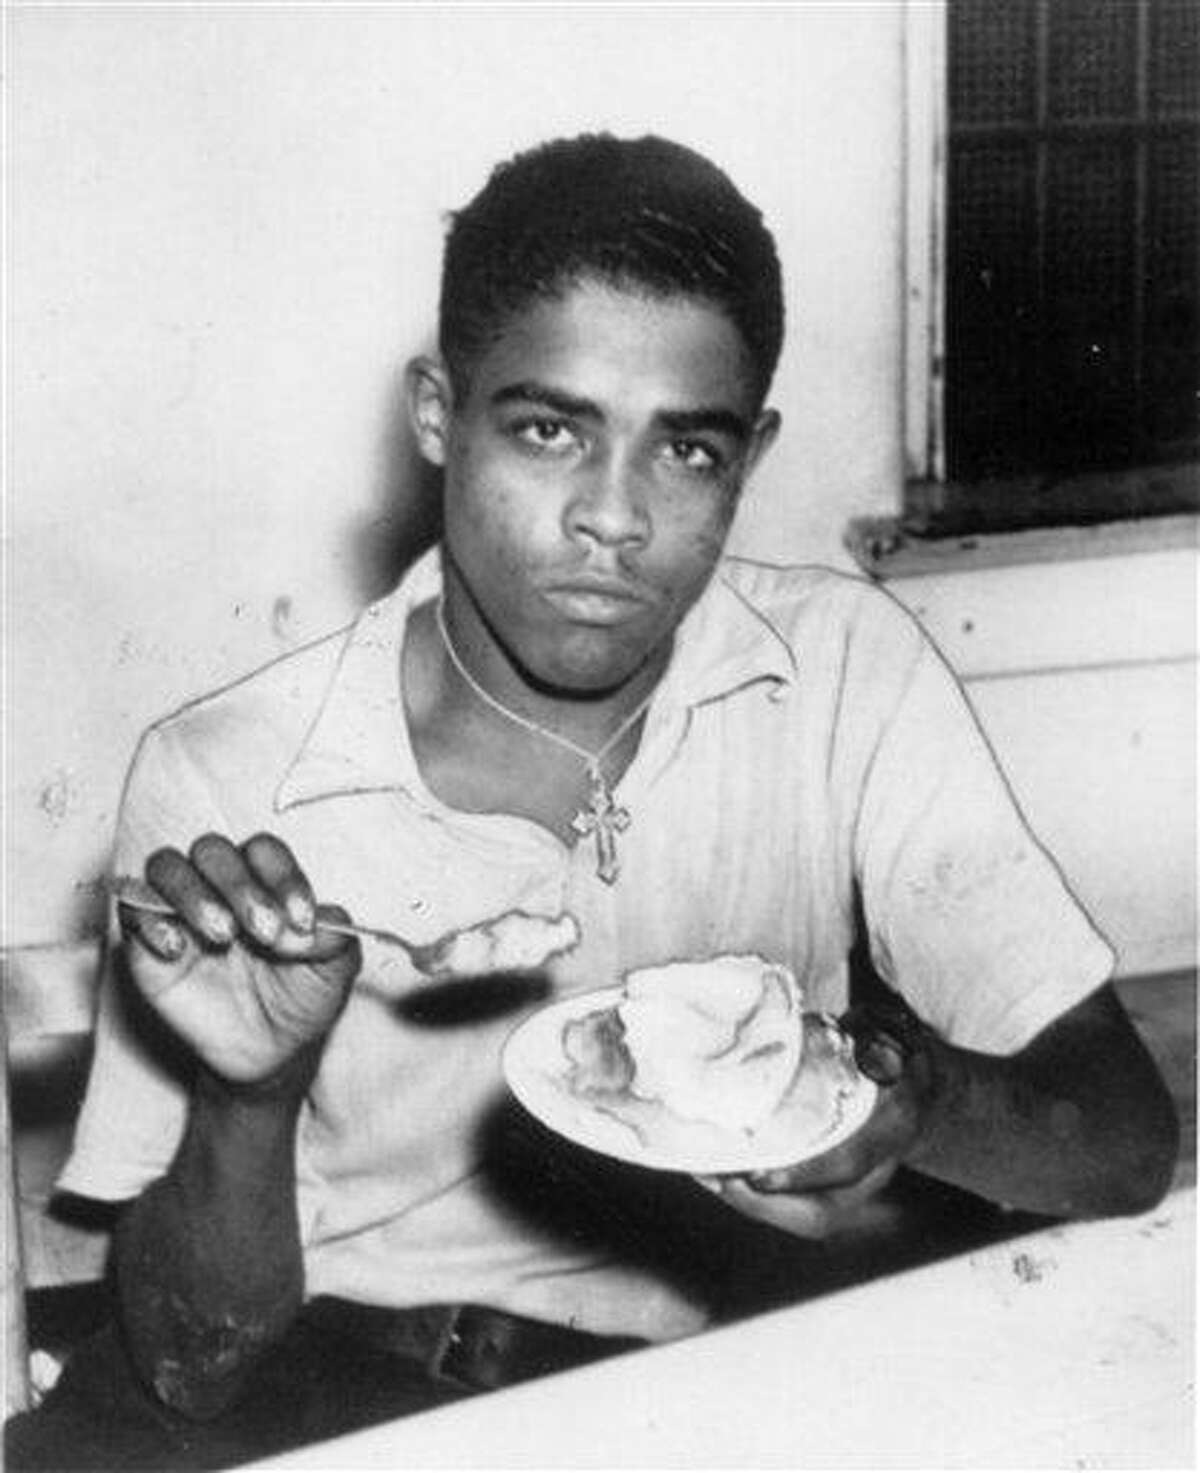 In this Thursday, Aug. 13, 1936 photo, Rainey Bethea has his last meal in Louisville, Ky. before being publicly hanged in Owensboro, Ky. Bethea, a 22-year-old black man convicted of murdering and robbing a 70-year-old white woman, was the last person killed in a public execution in the United States. (AP Photo/The Courier-Journal)